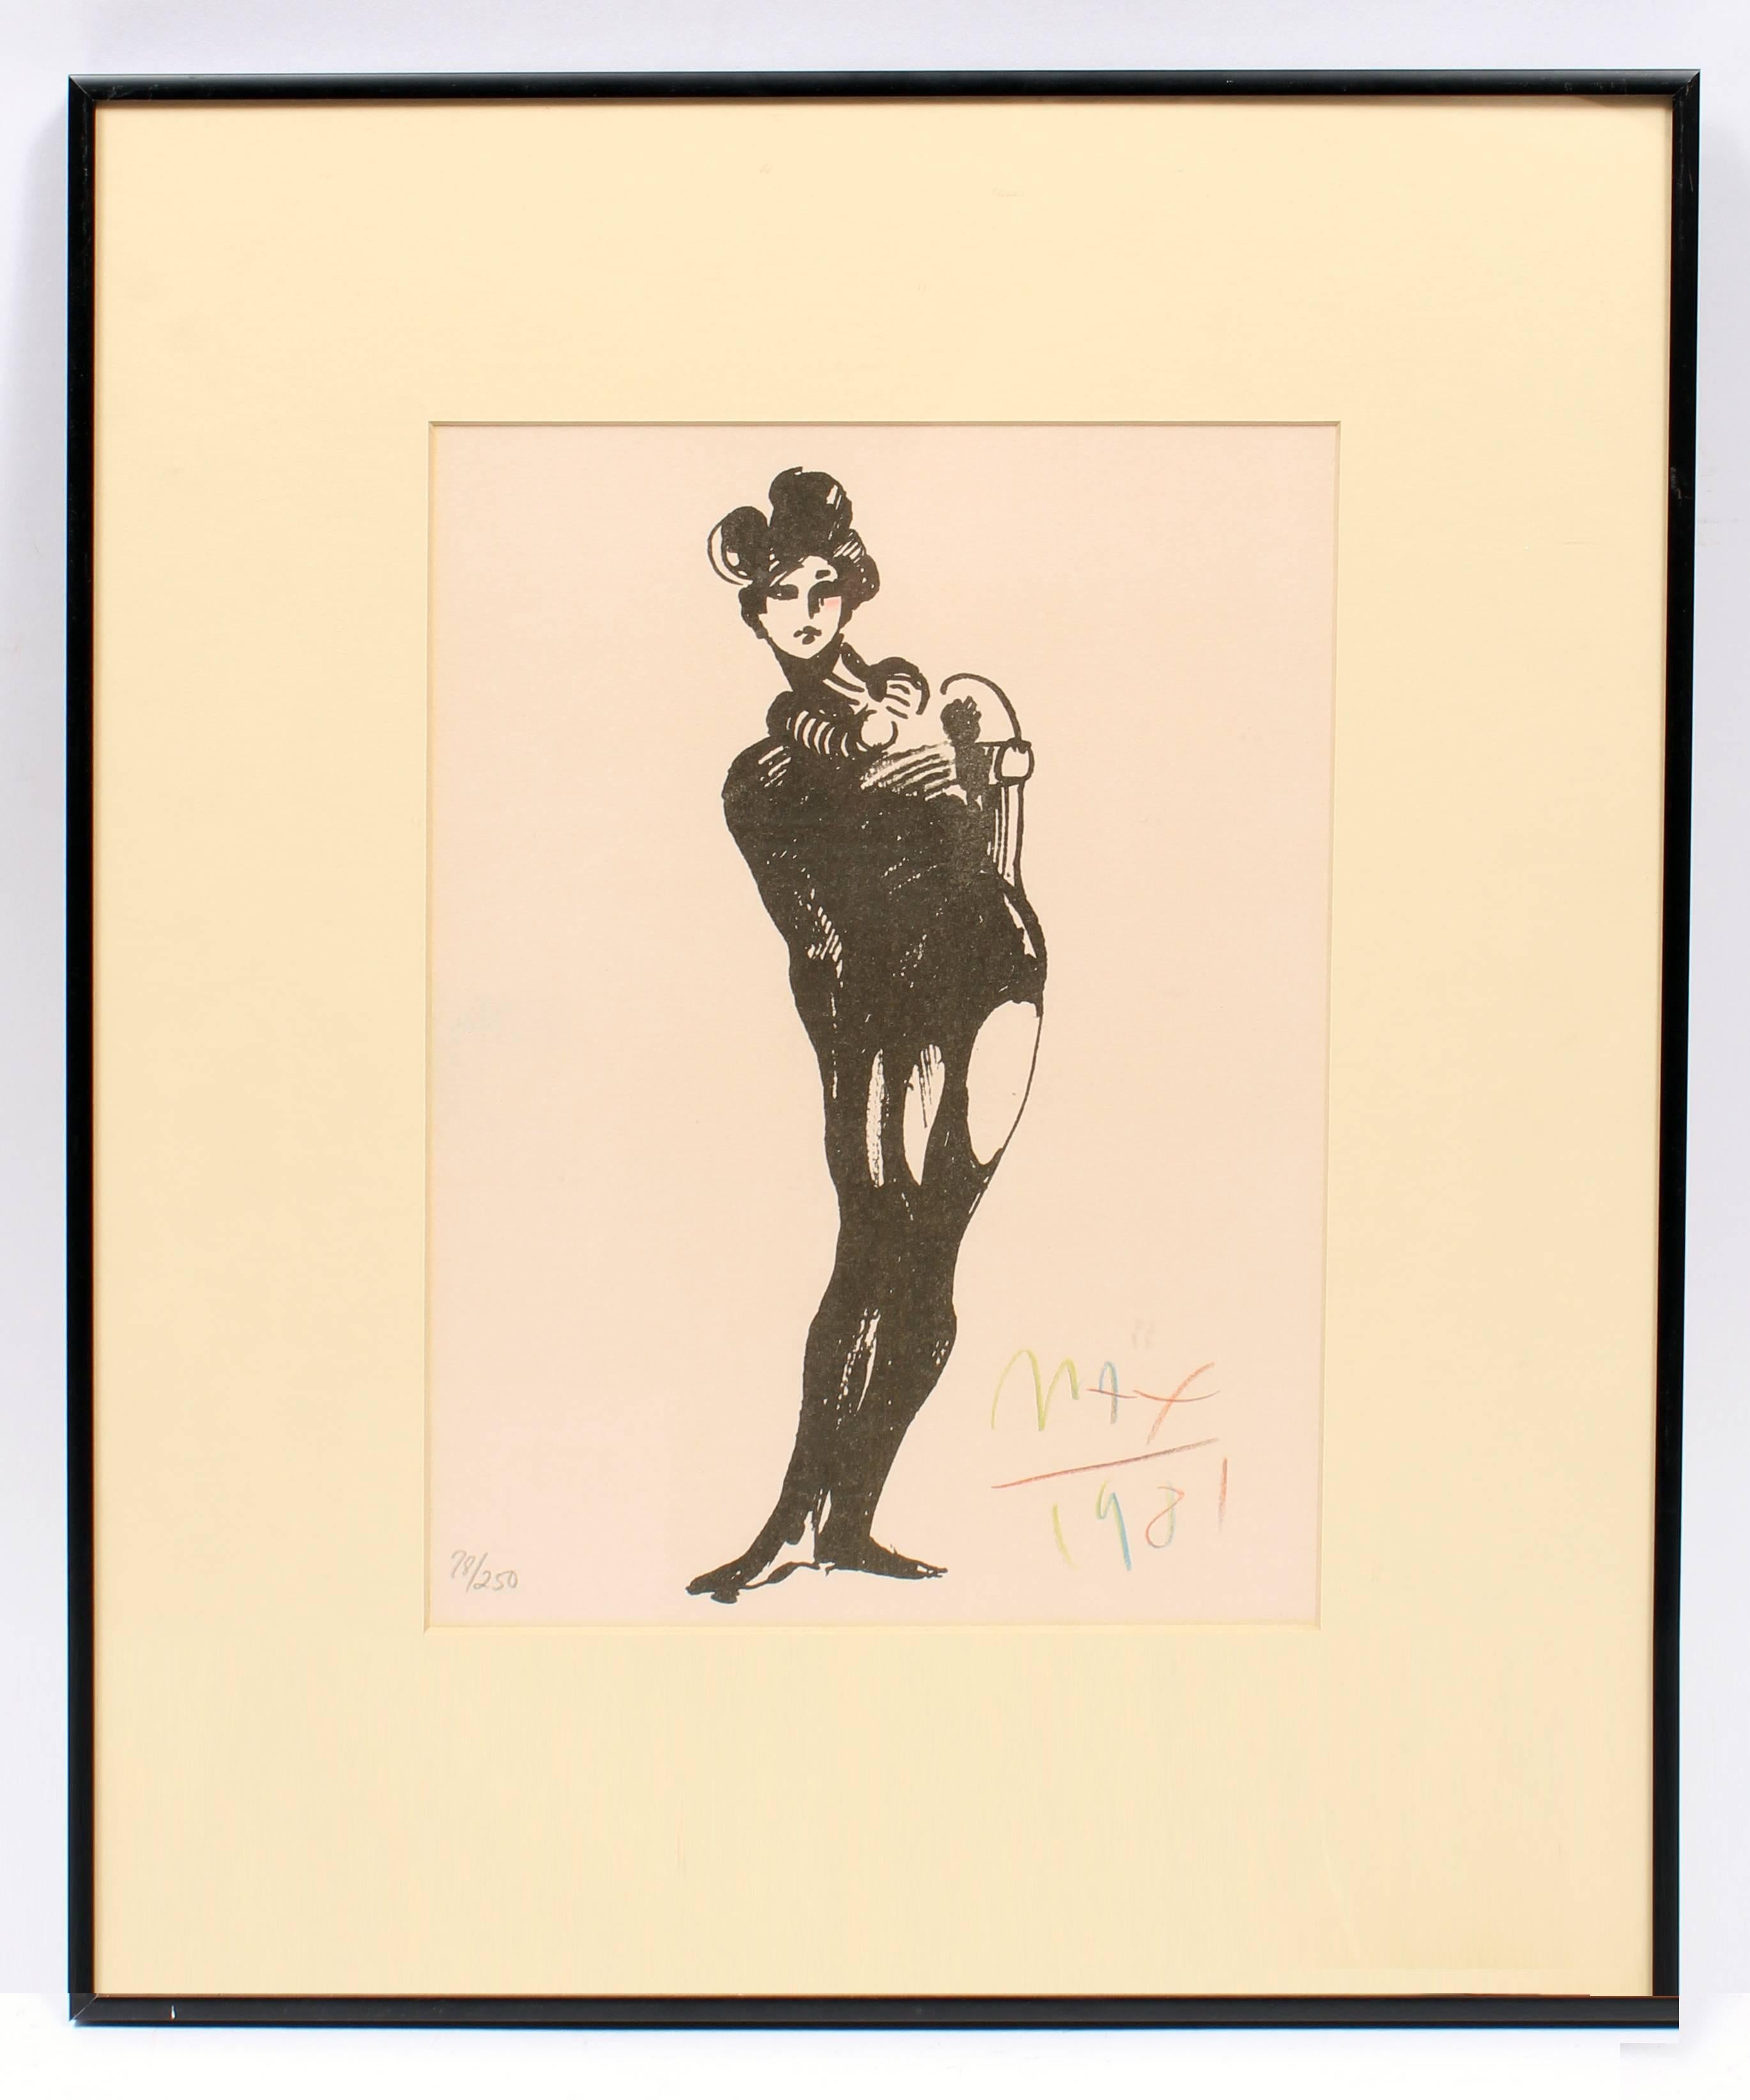 The Mime - Print by Peter Max